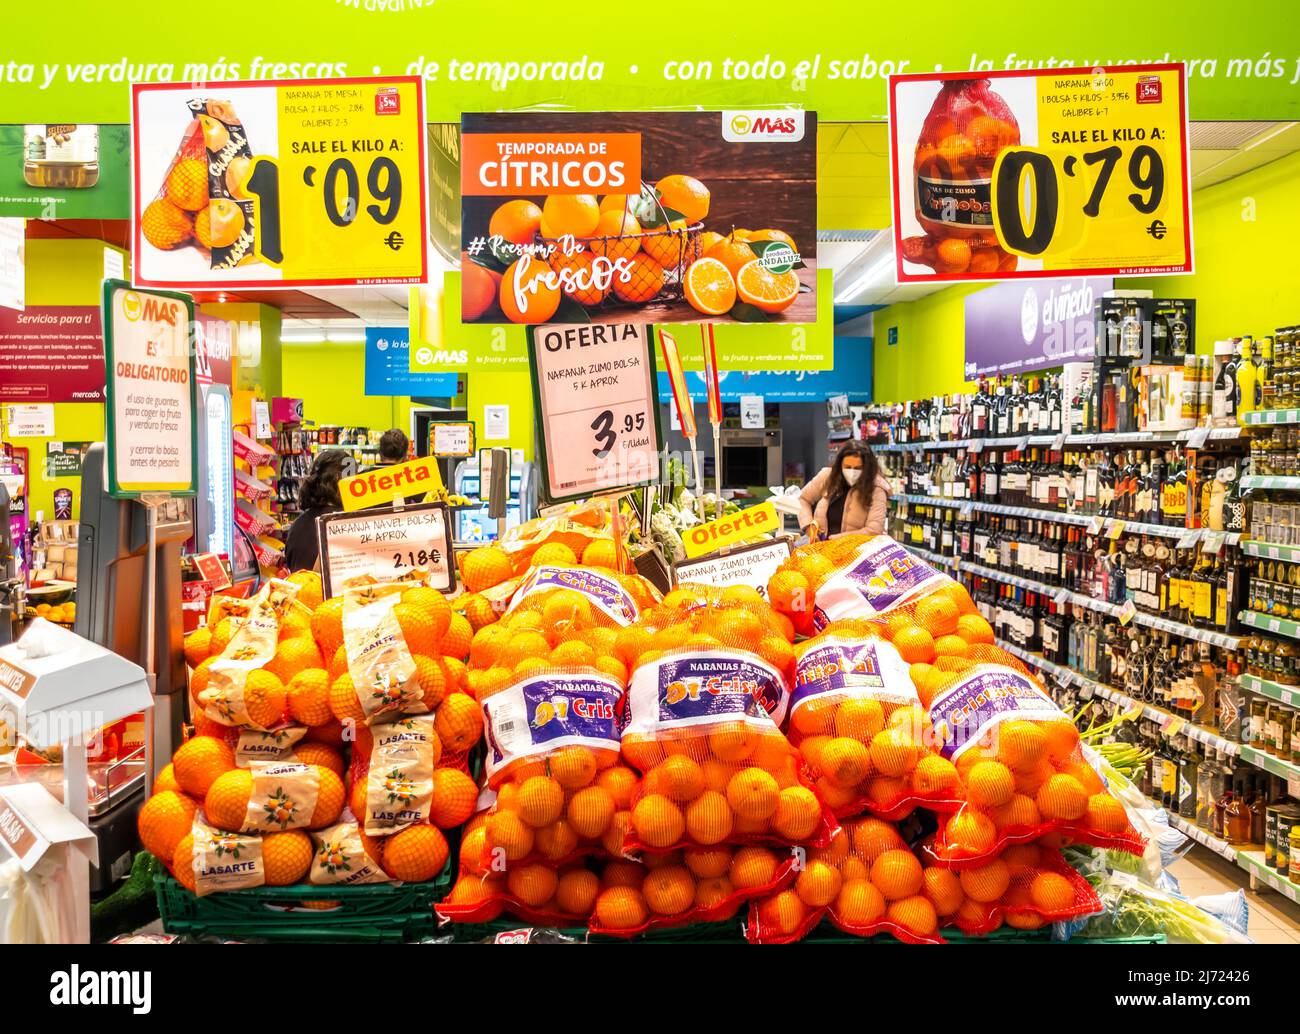 )ranges with price tags in MAS supermarket Seville Spain Stock Photo